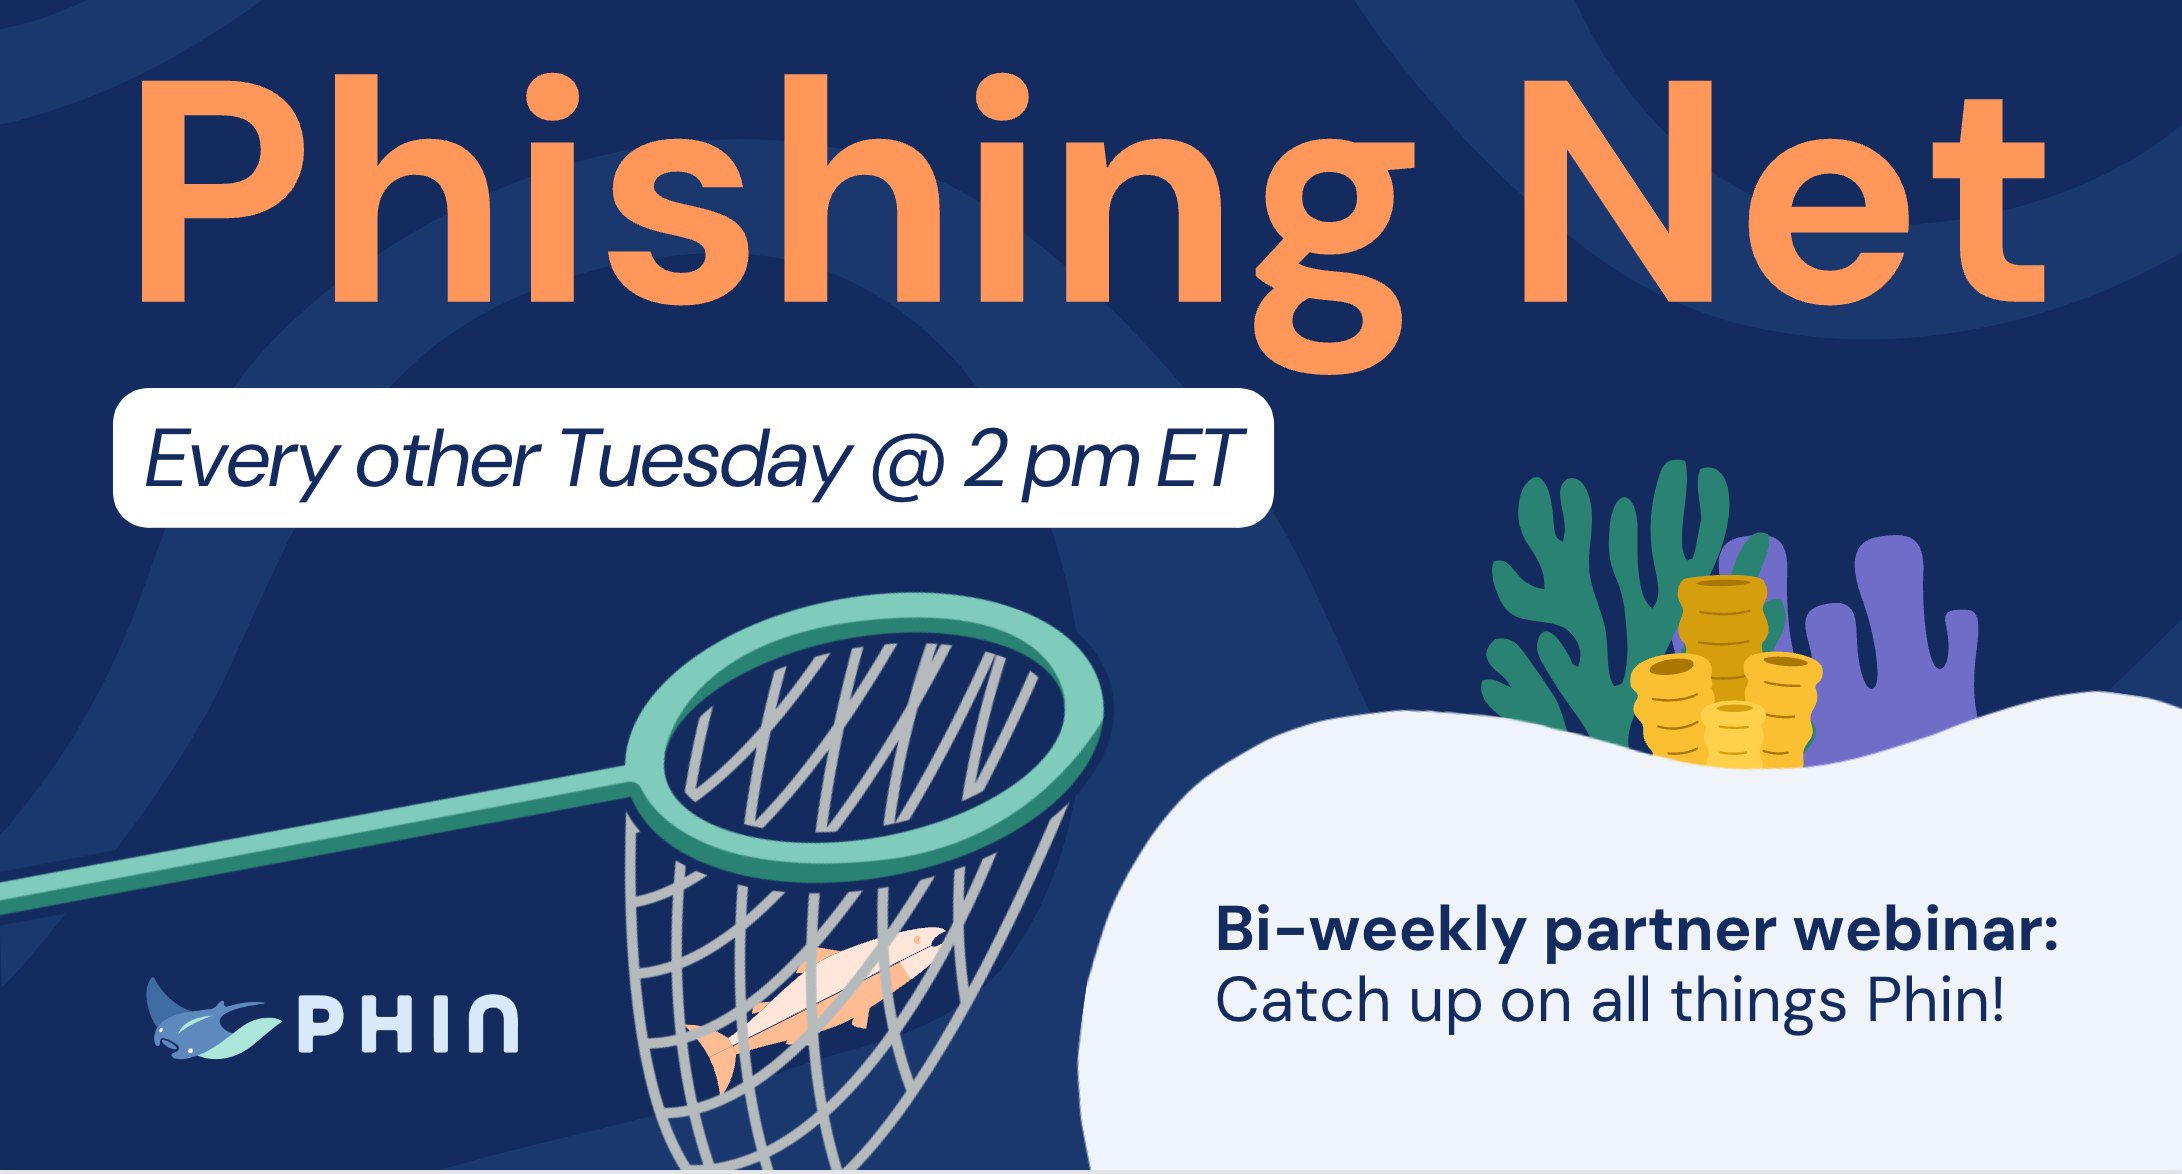 Phin's Phishing Net: Catch Up on All Things Phin event cover photo